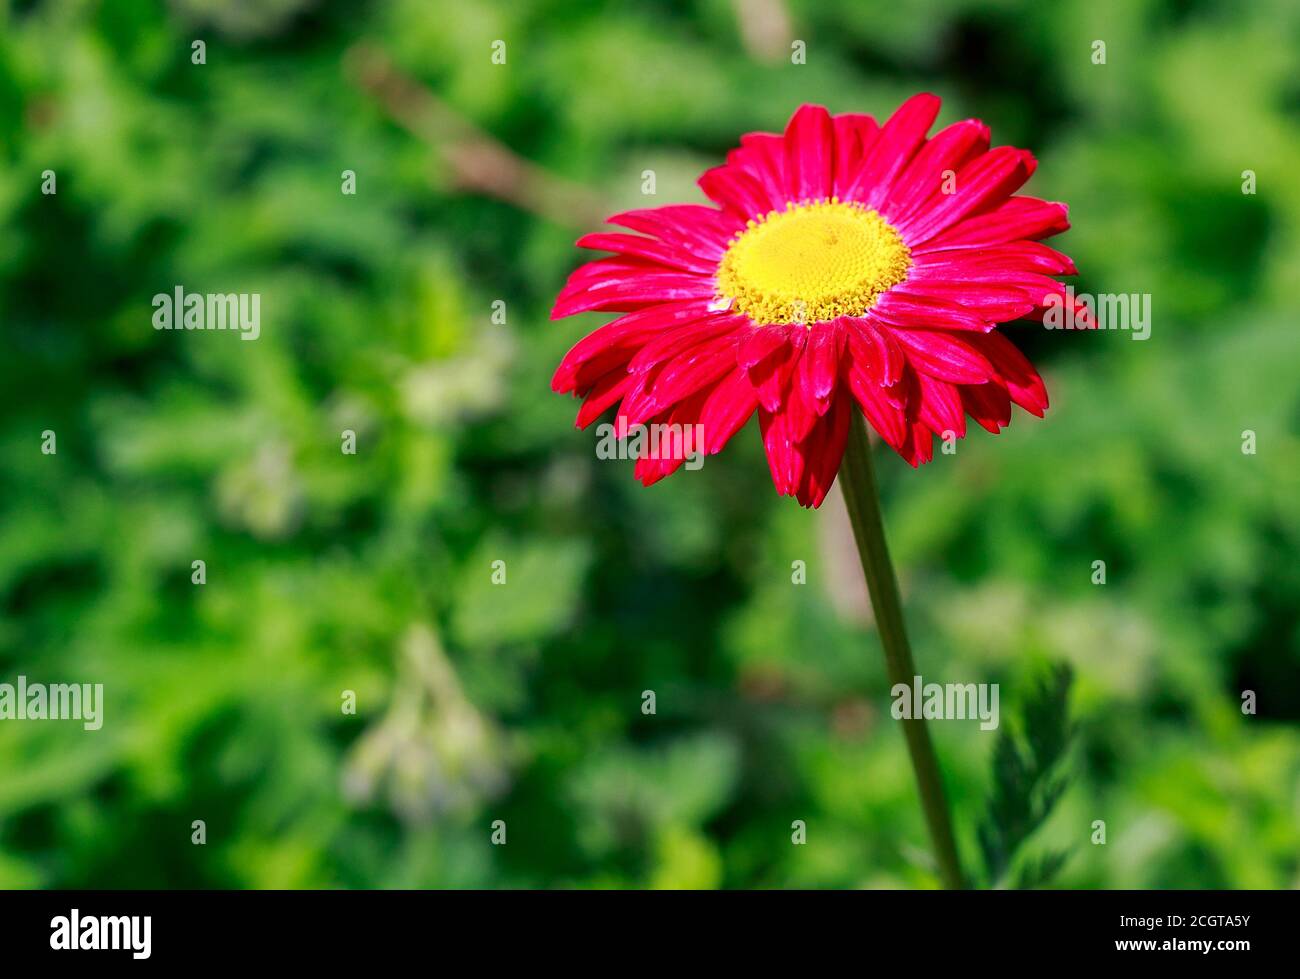 Pretty Bright Single Stem of a Red Gerbera Flower with a bright yellow stamen, against a bright green blurred garden background Stock Photo